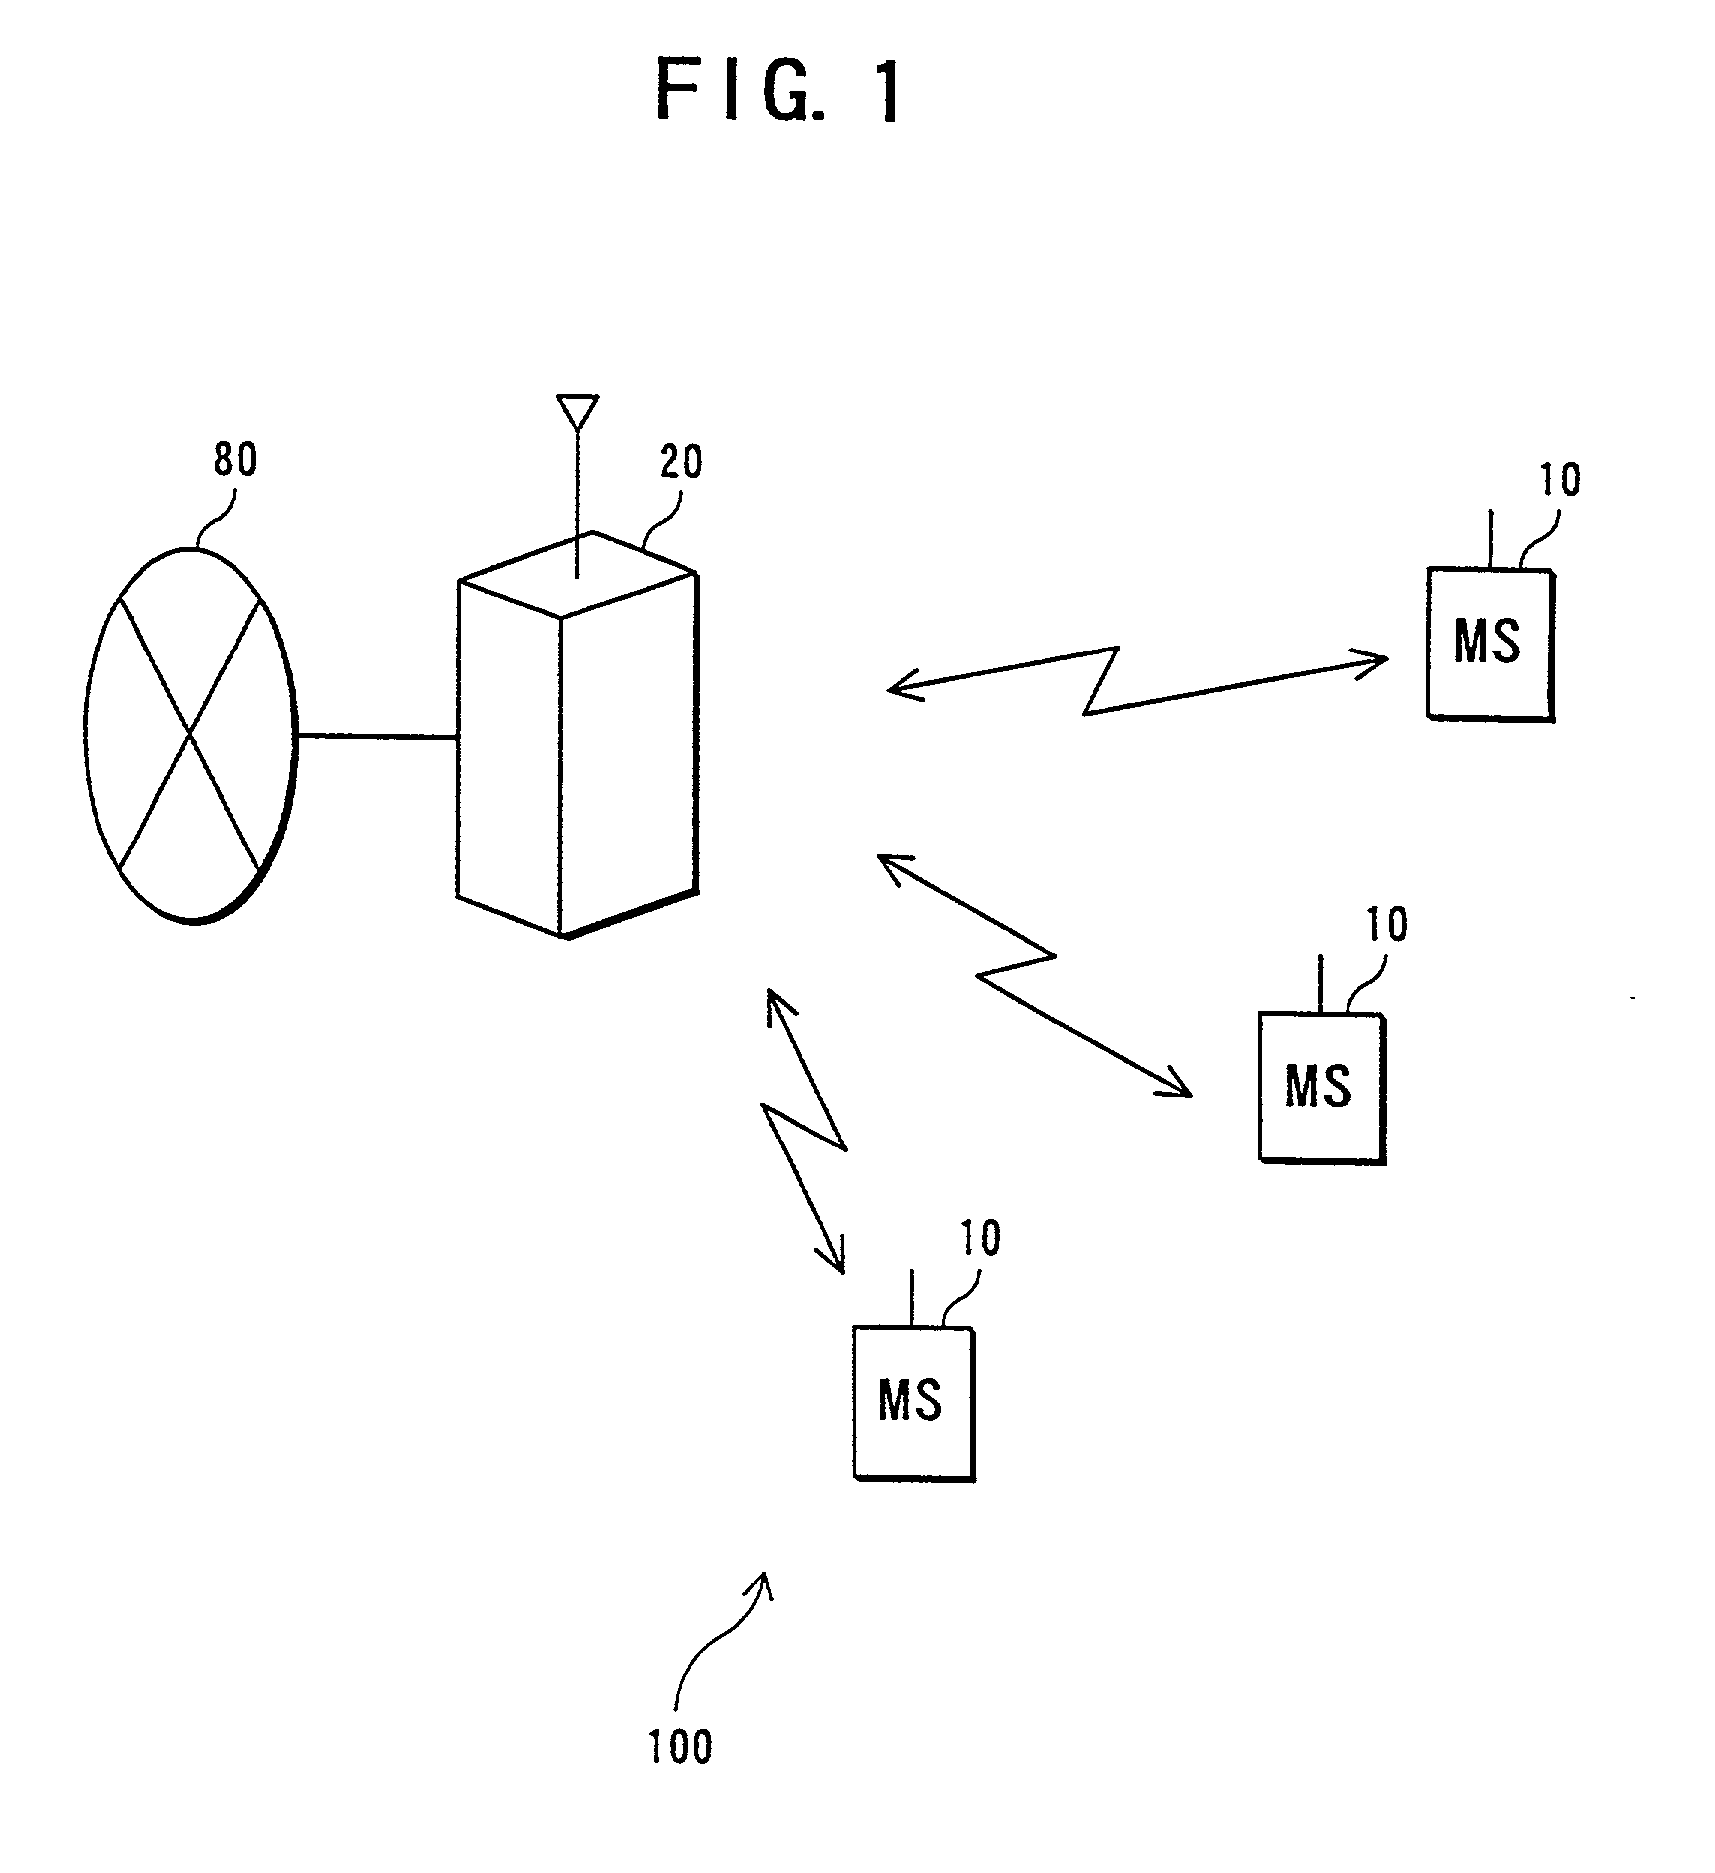 Power control apparatus and power control method